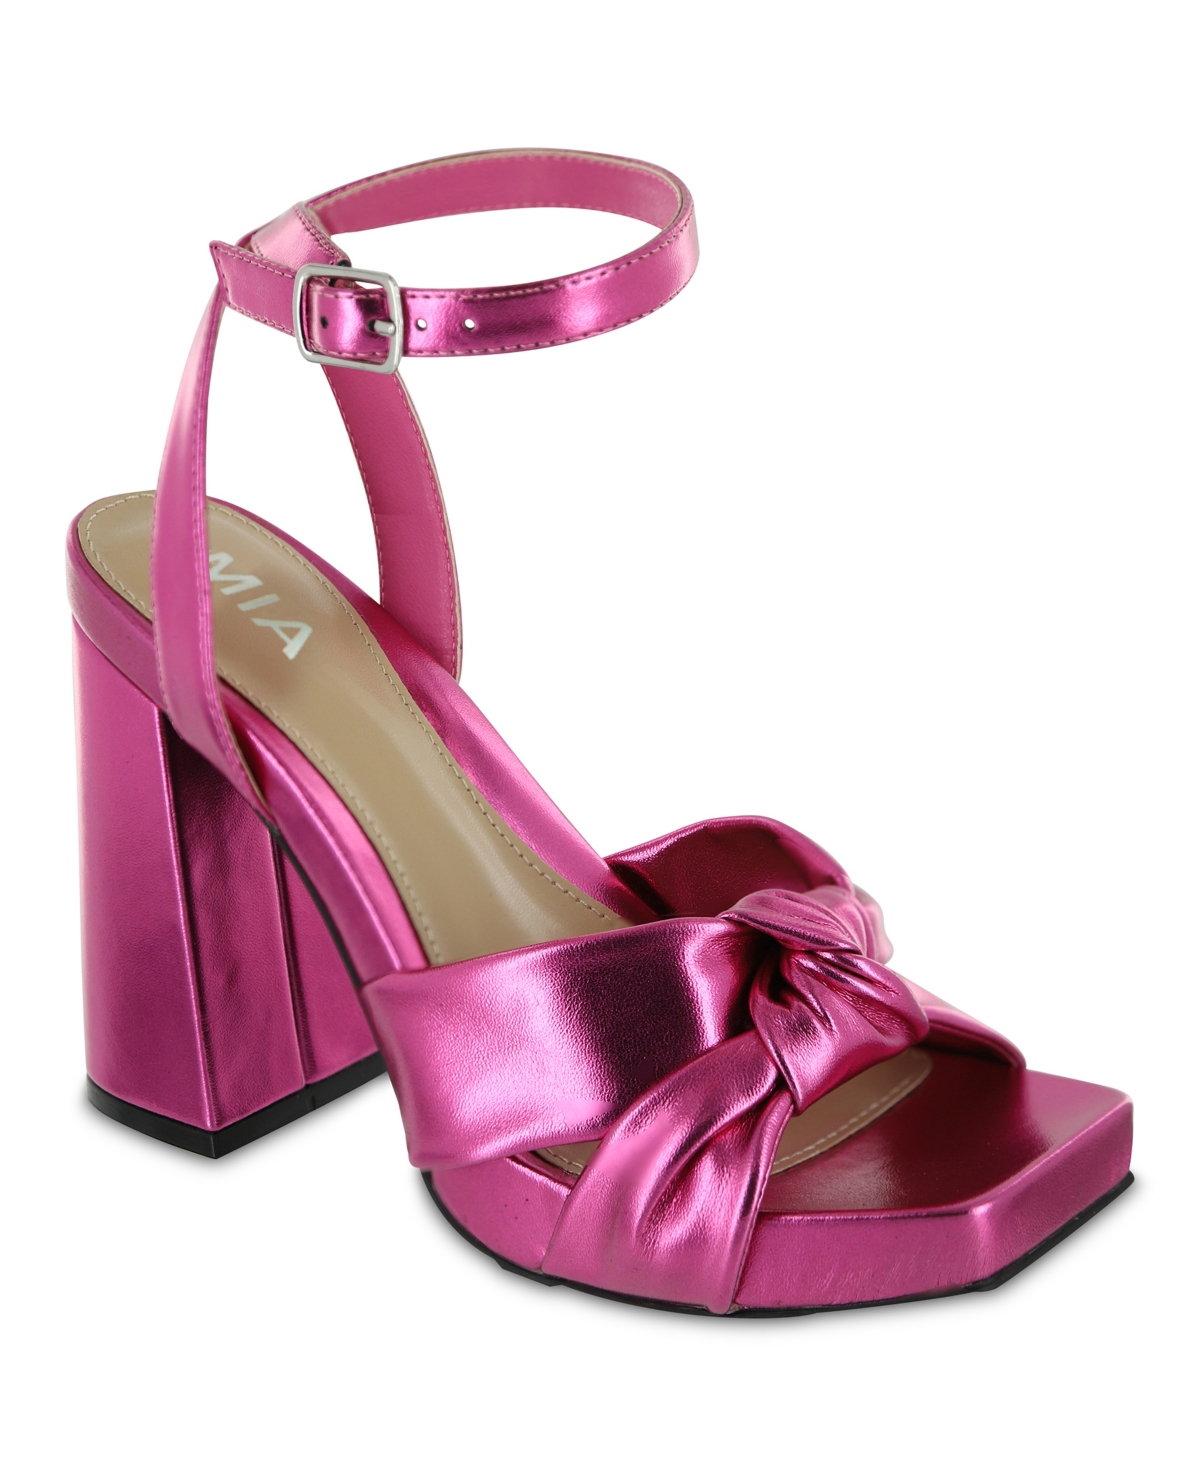 Mia Esma Knotted Sandal In Pink